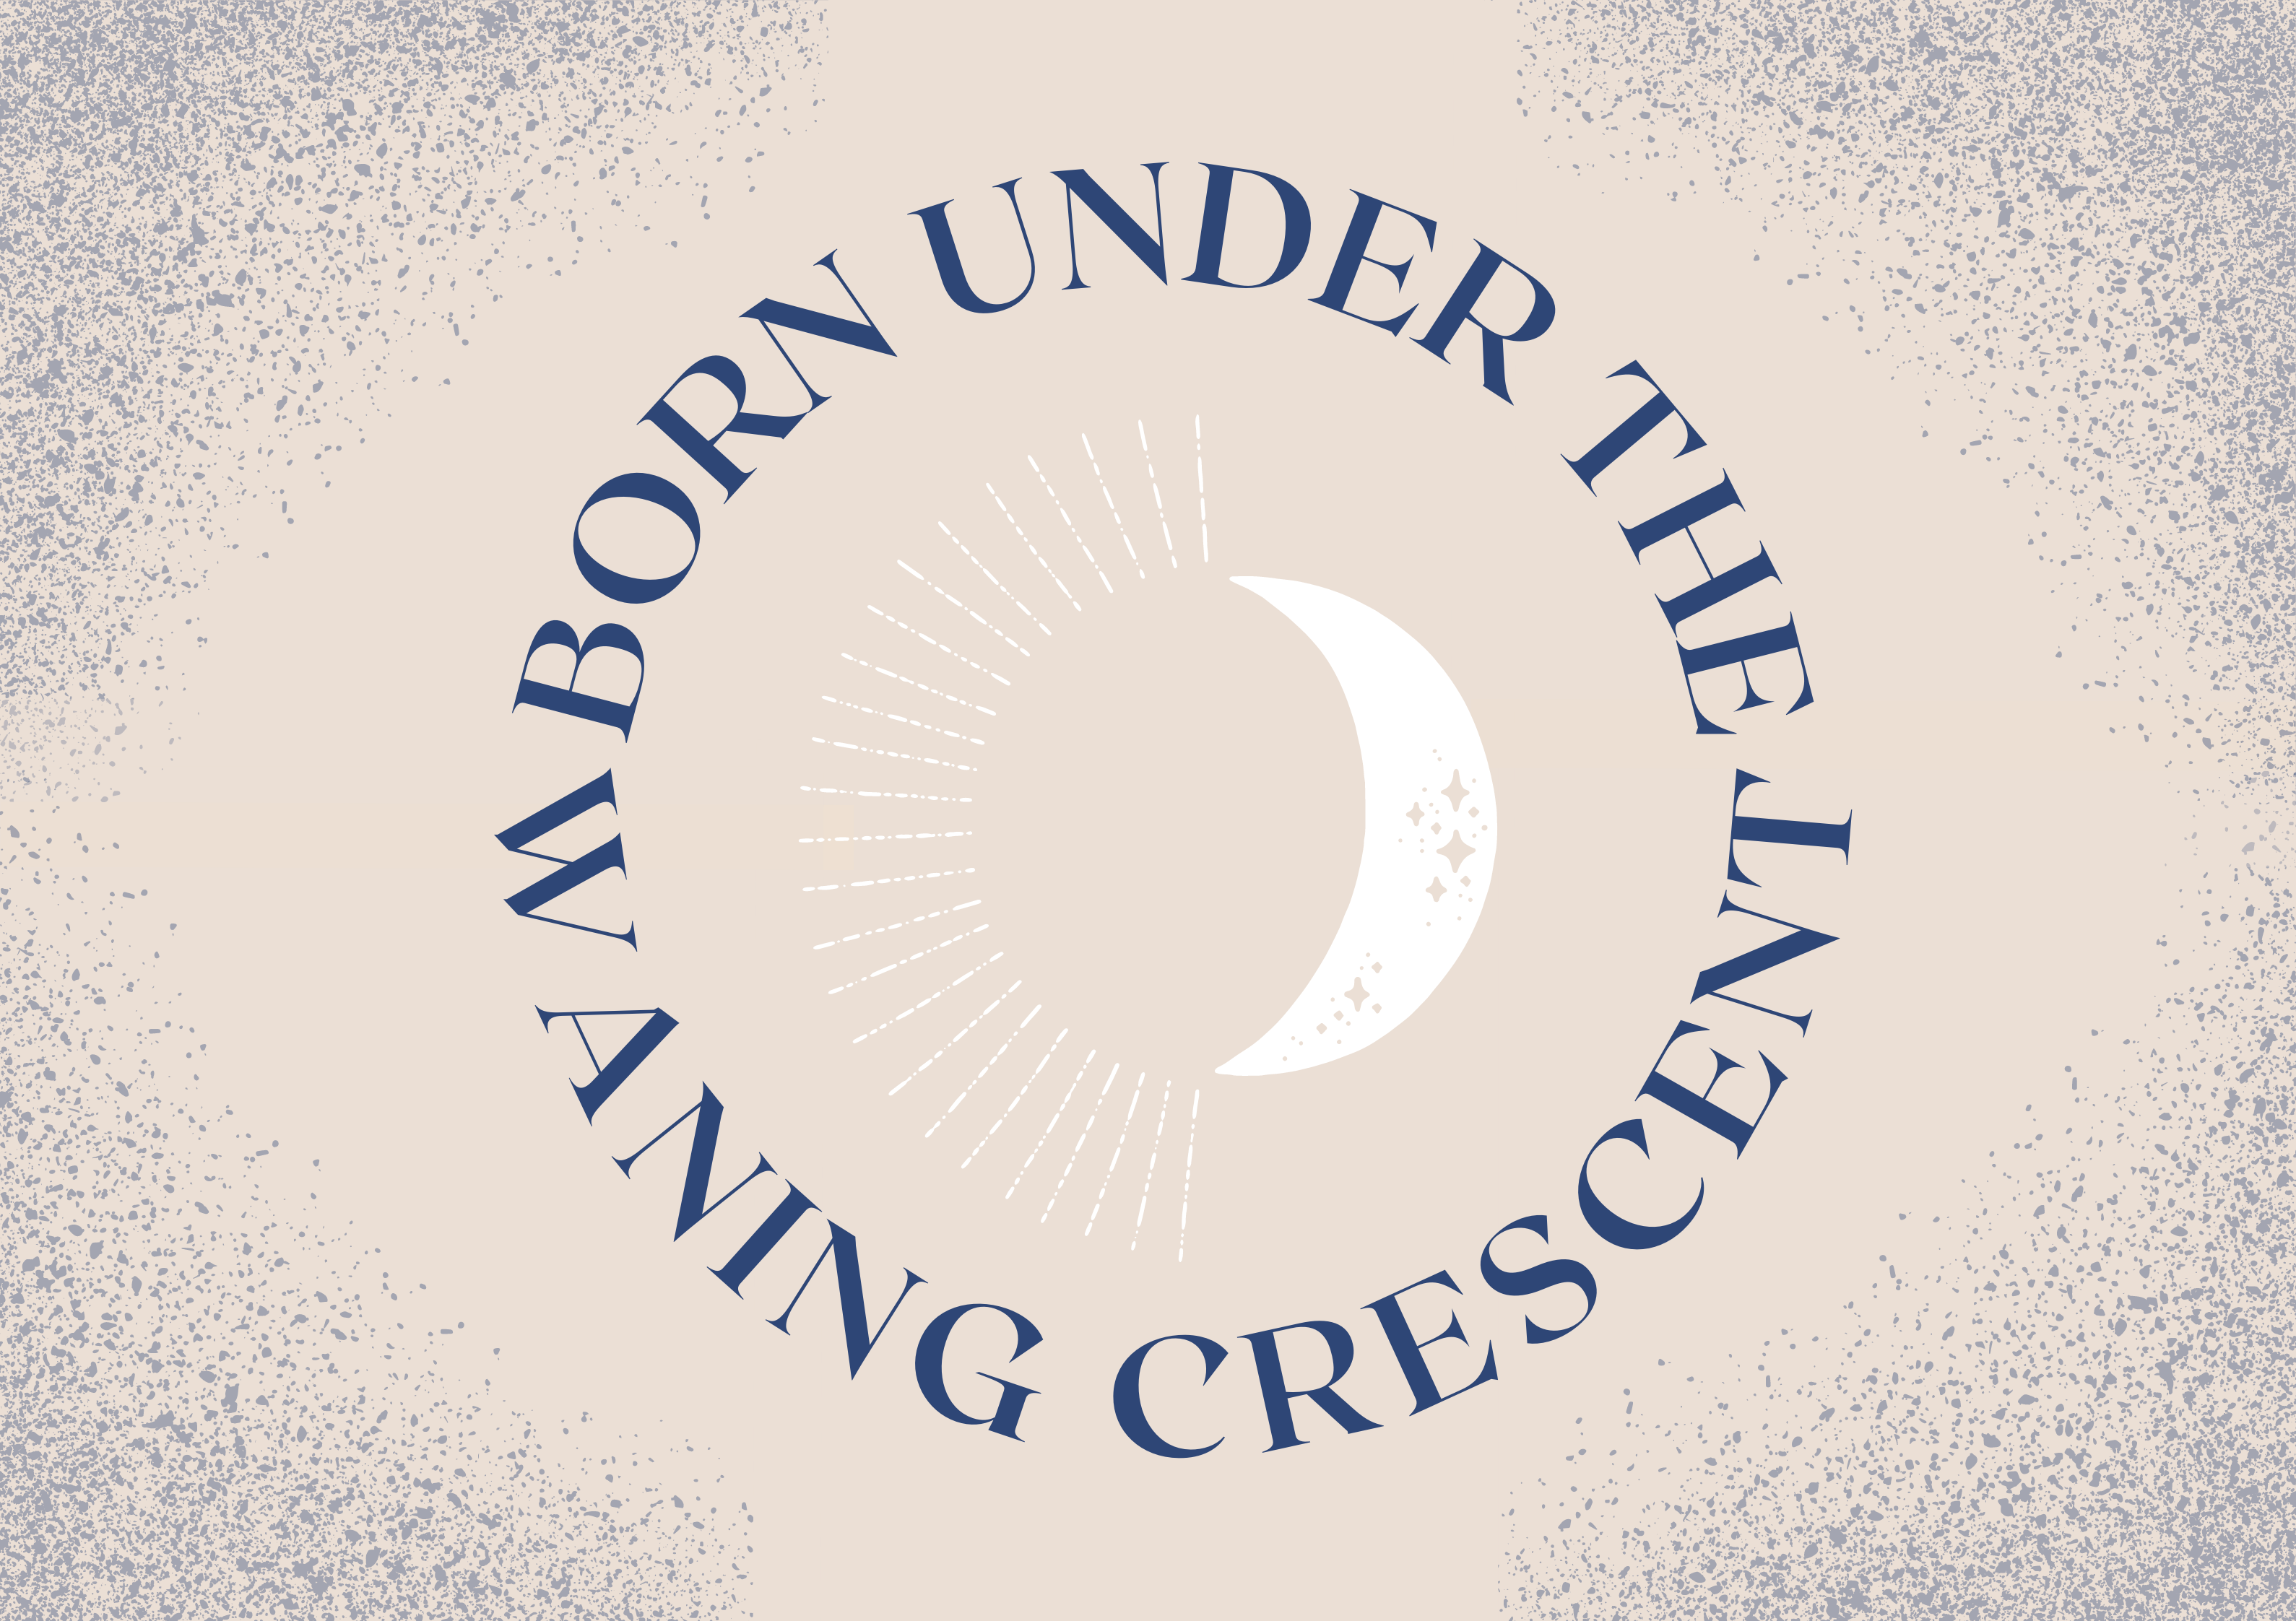 What is a waning crescent moon?